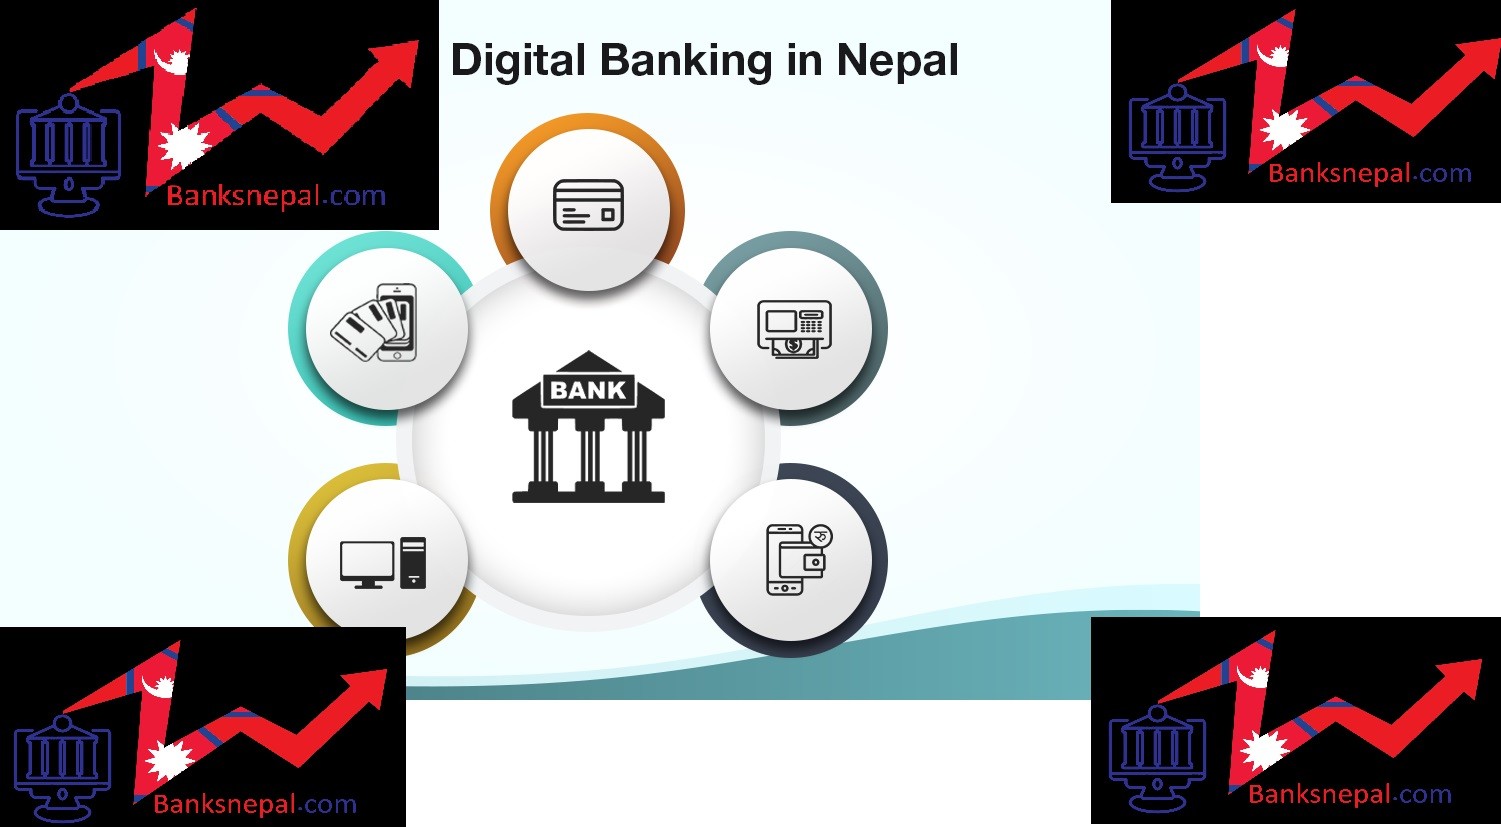 Digital Banking and Payment Trend in Nepal : Himalayan Bank introduced ATM and Credit card first time in Nepal